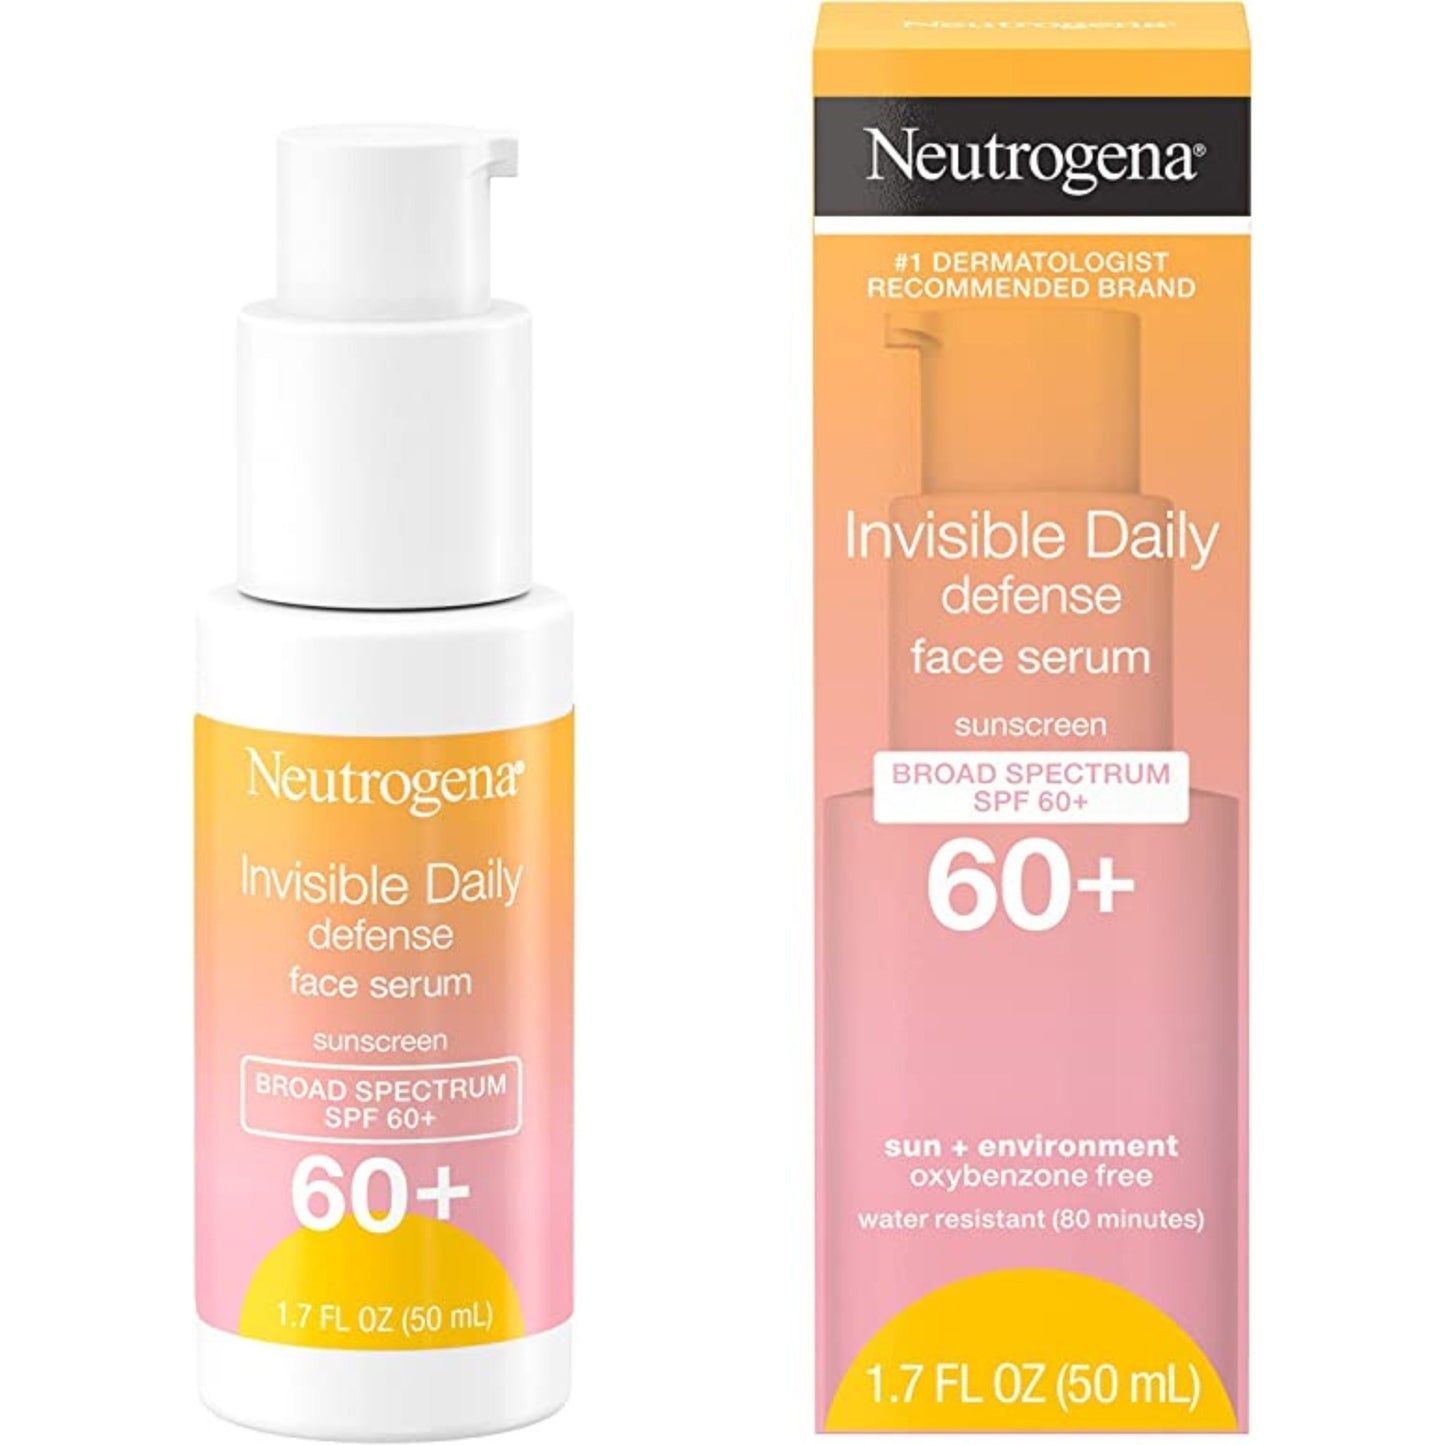 Neutrogena Invisible Daily Defense Face Serum with Broad Spectrum SPF 60+ to Help Even Skin Tone, Oil-Free, Non-Greasy, Antioxidant Complex for Environmental Aggressors, White, 1.7 fl. Oz